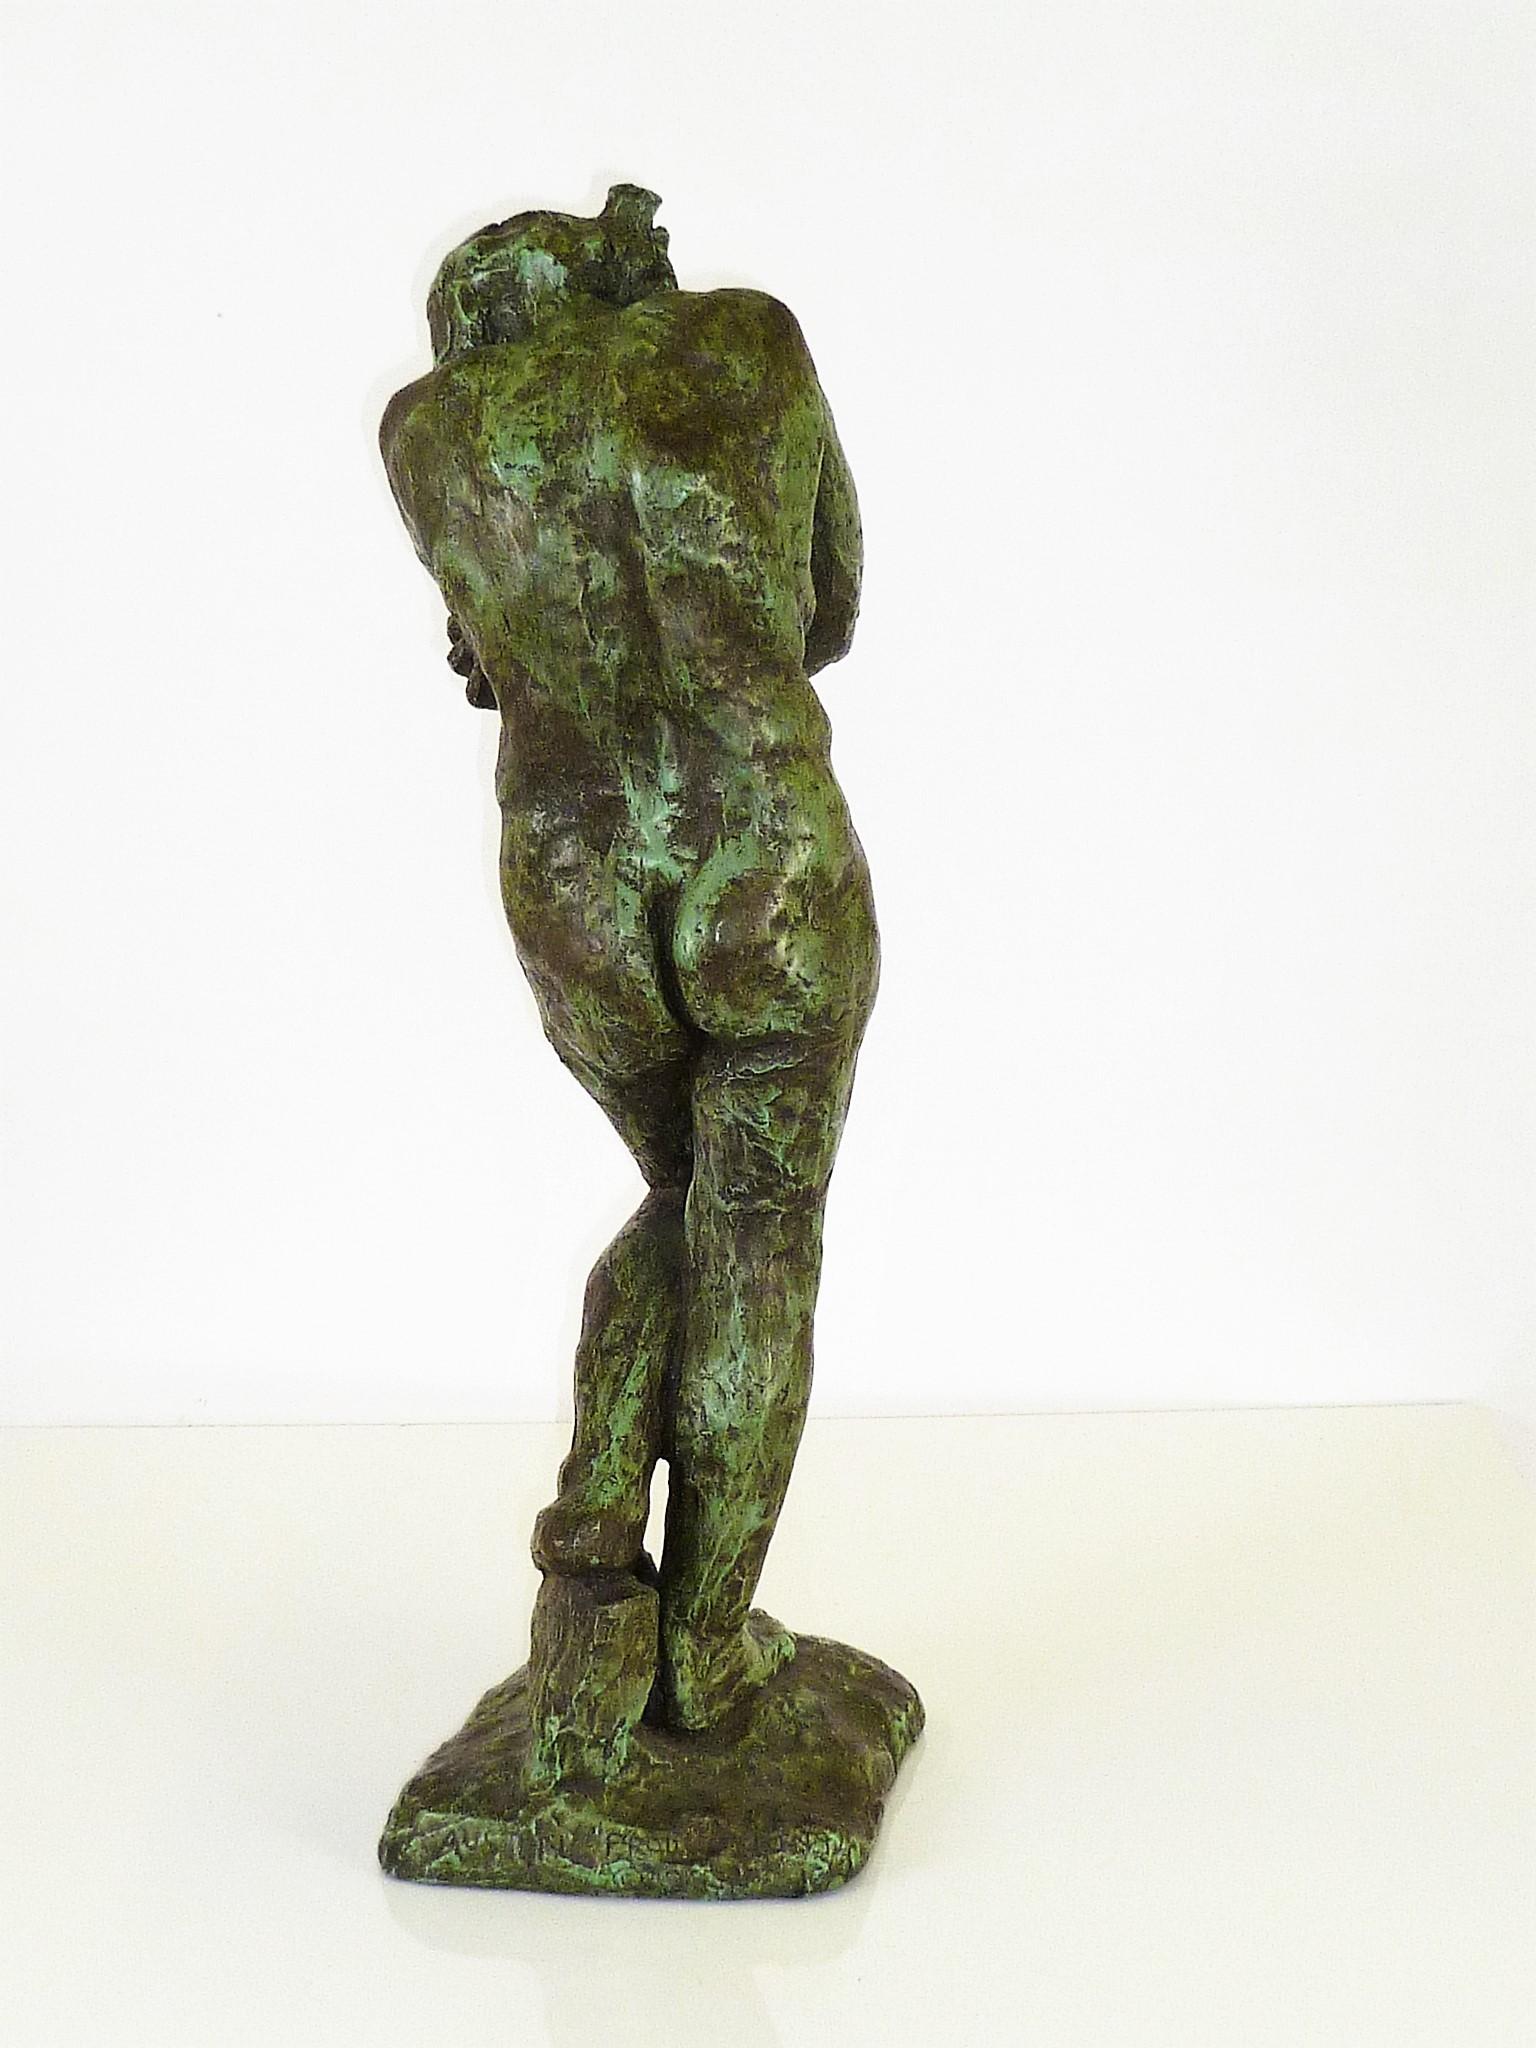 Classical female nude, reproduced in 1962 in verdigris plaster to resemble aged bronze of Eve in Rodin’s The Gates of Hell creation of 1881. Rodin borrowed the stand of Eve from Micheangelo’s The Expulsion from Paradise painted in the ceiling of the